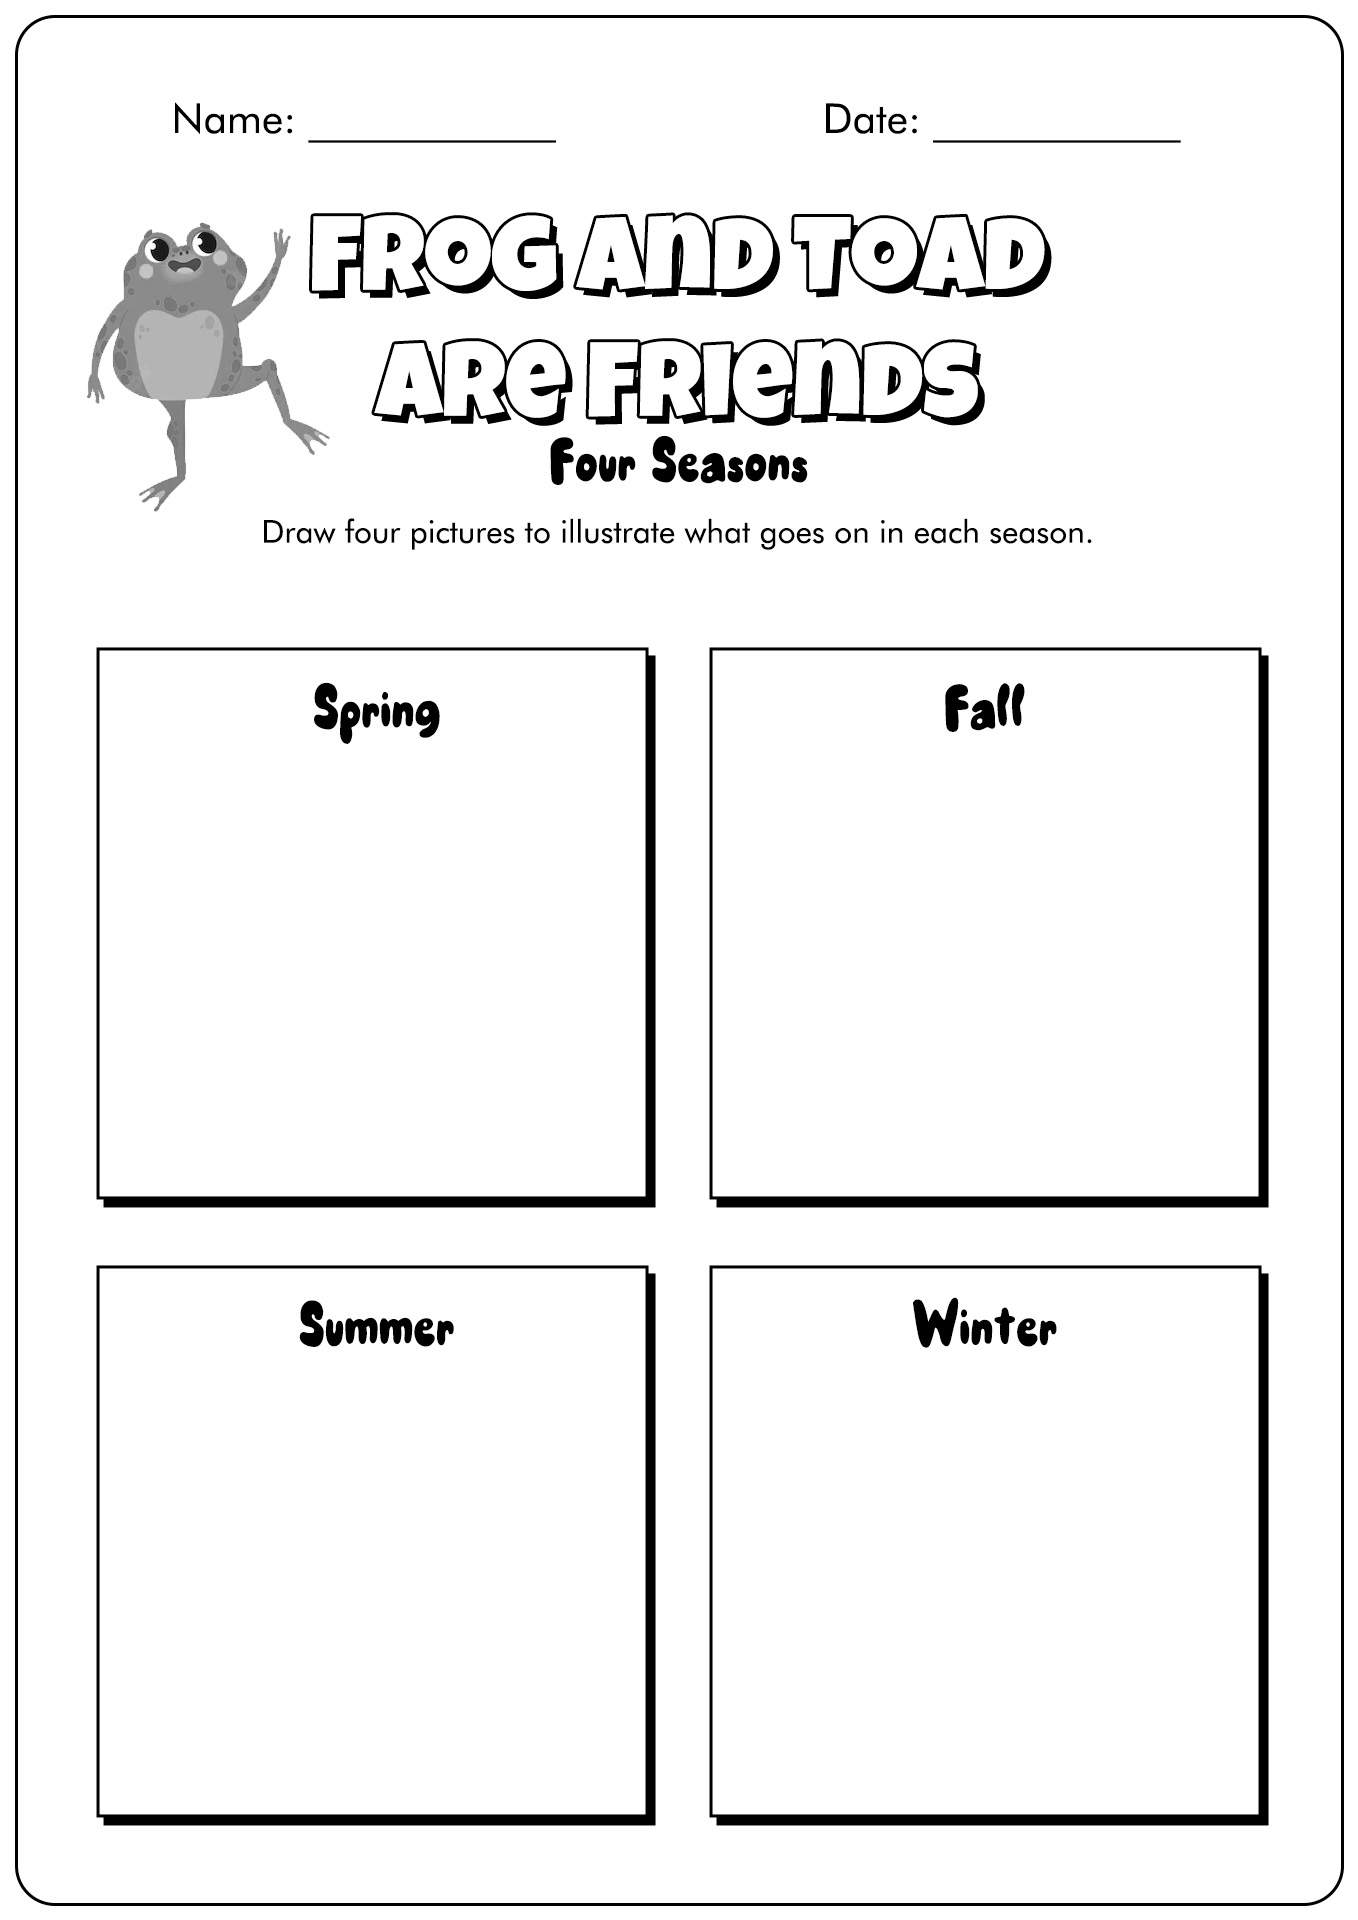 Frog and Toad Are Friends Worksheets